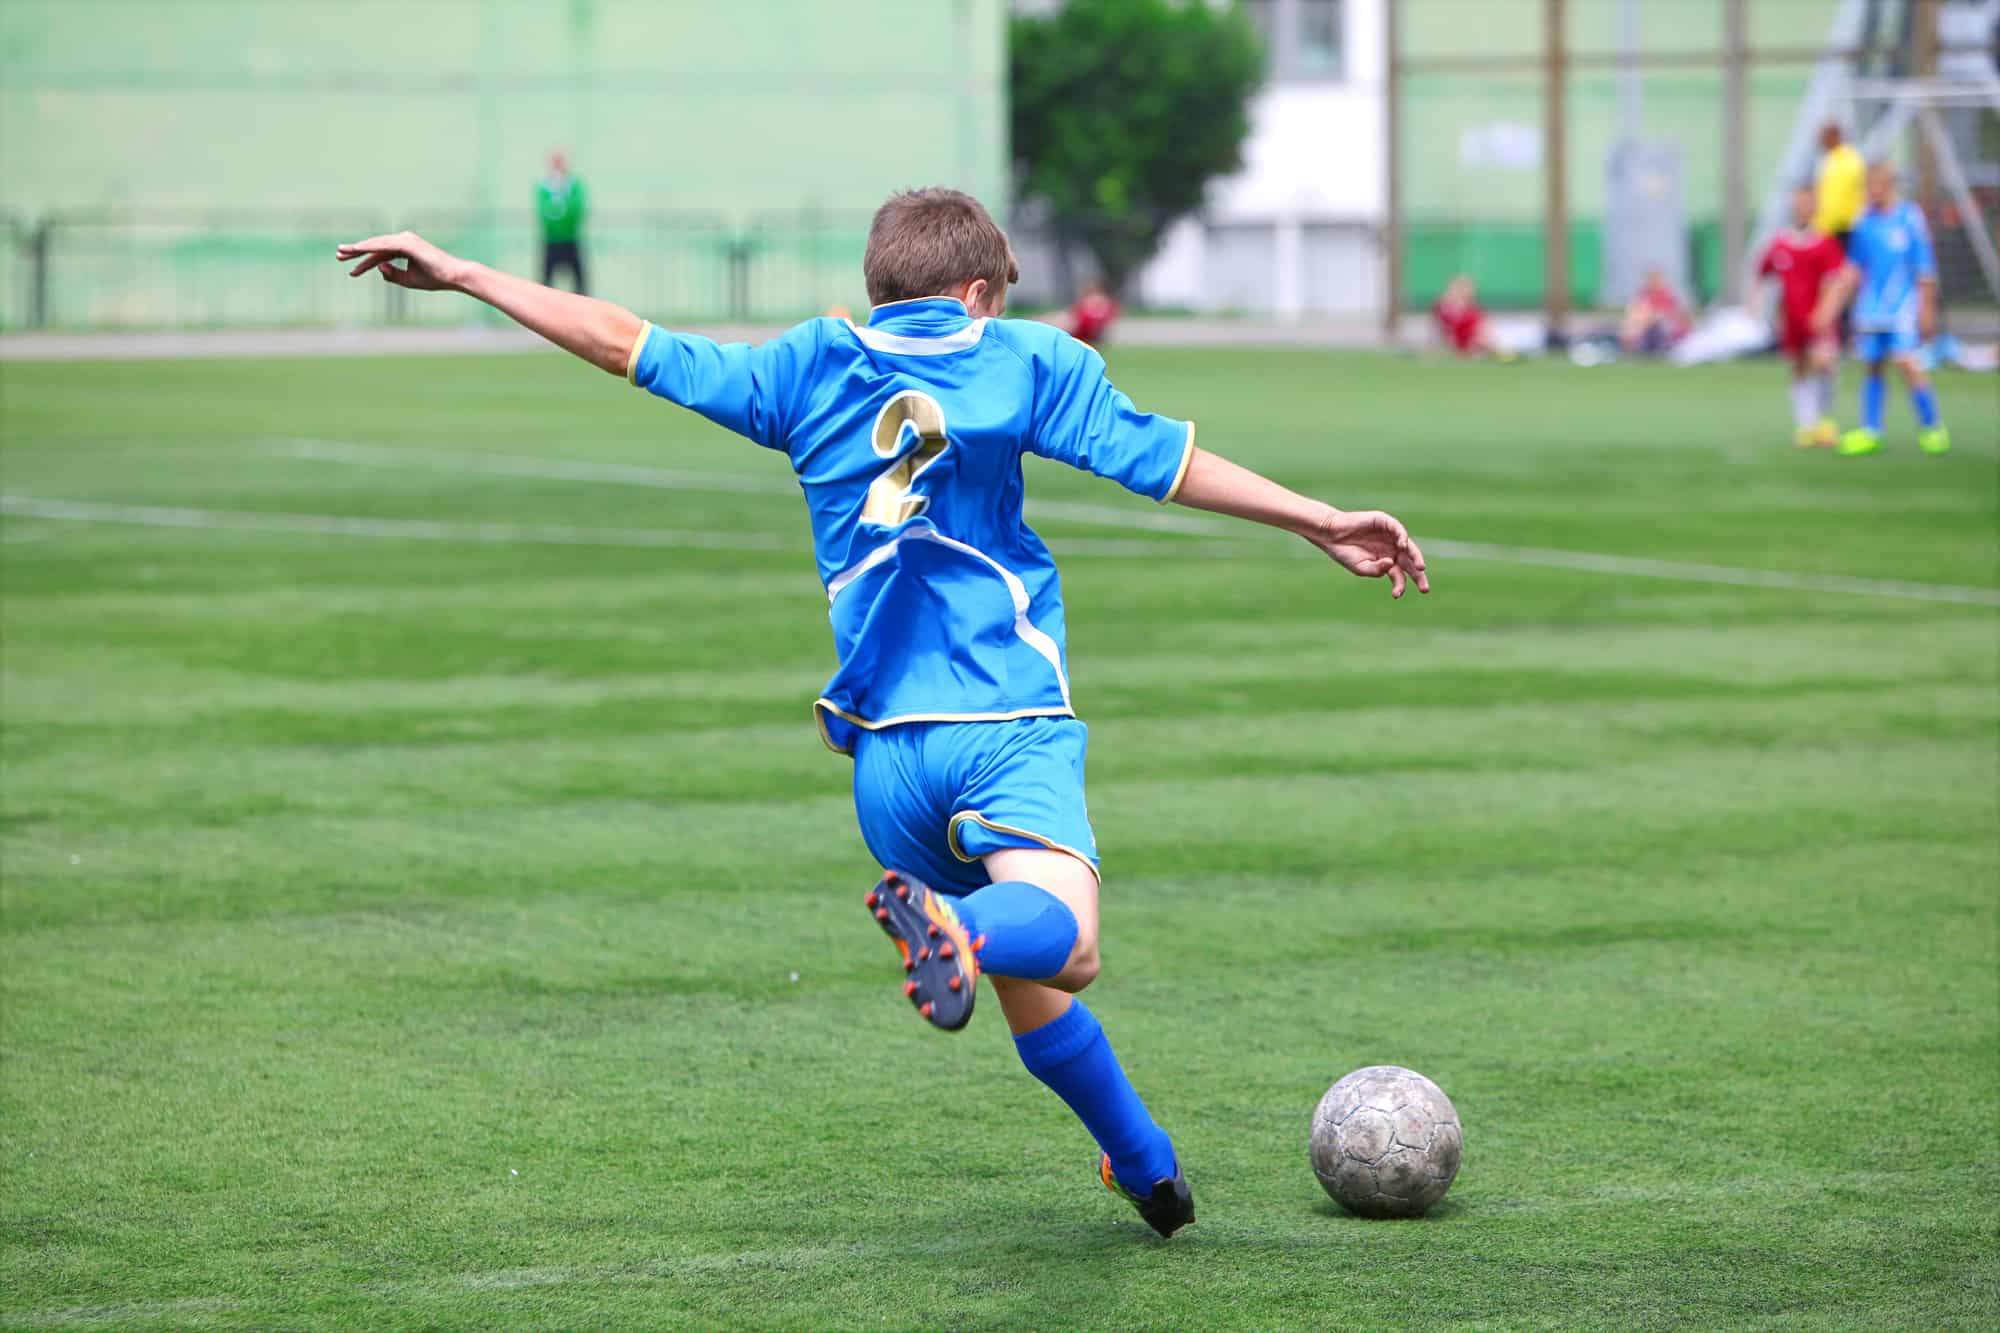 Chiropractic and Spinal Care Protects Soccer Players